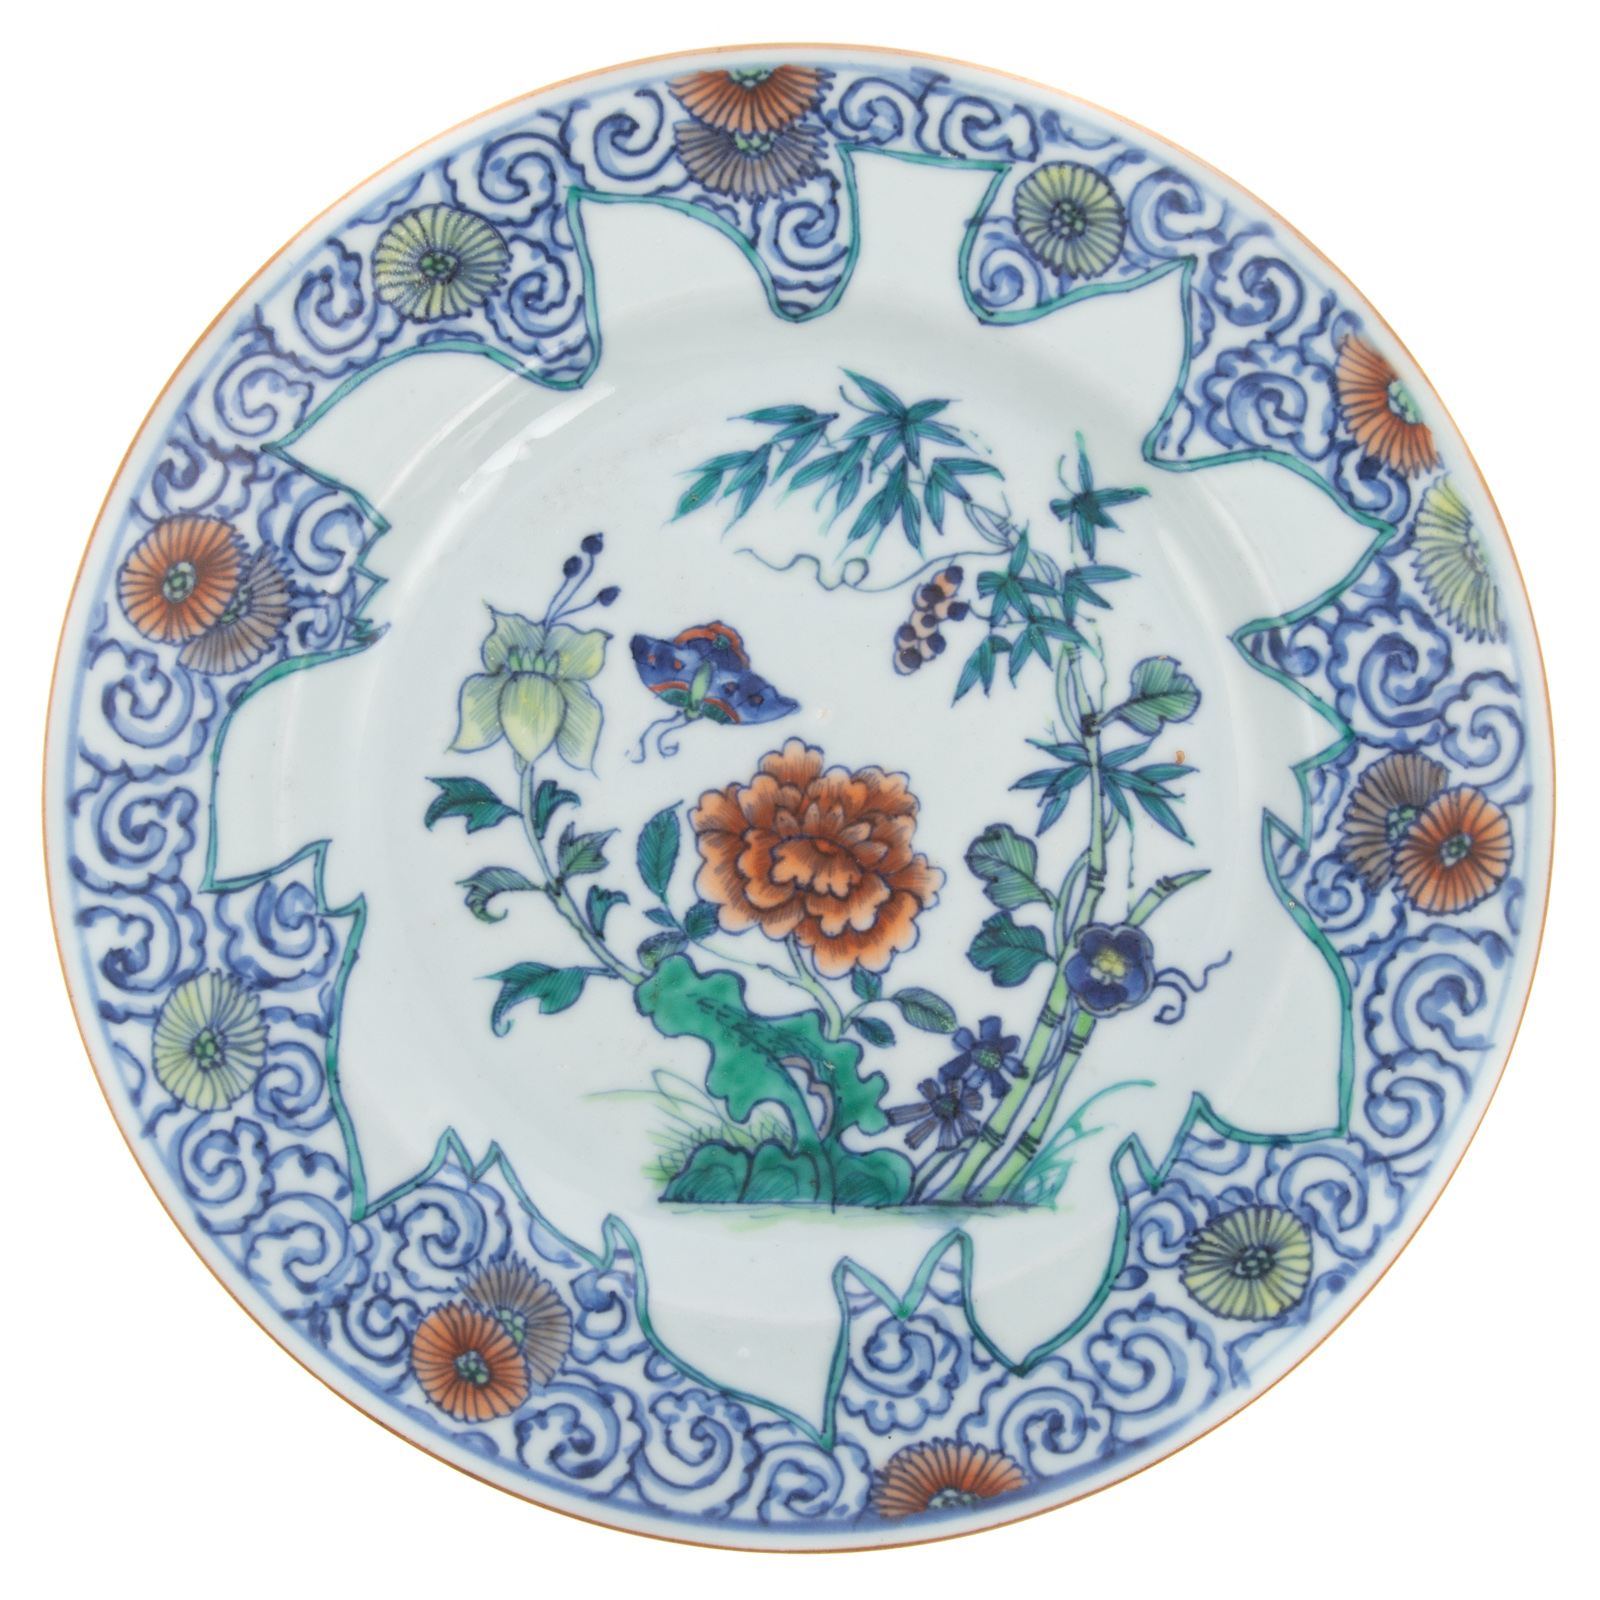 CHINESE EXPORT DOUCAI PLATE Late 3caf56